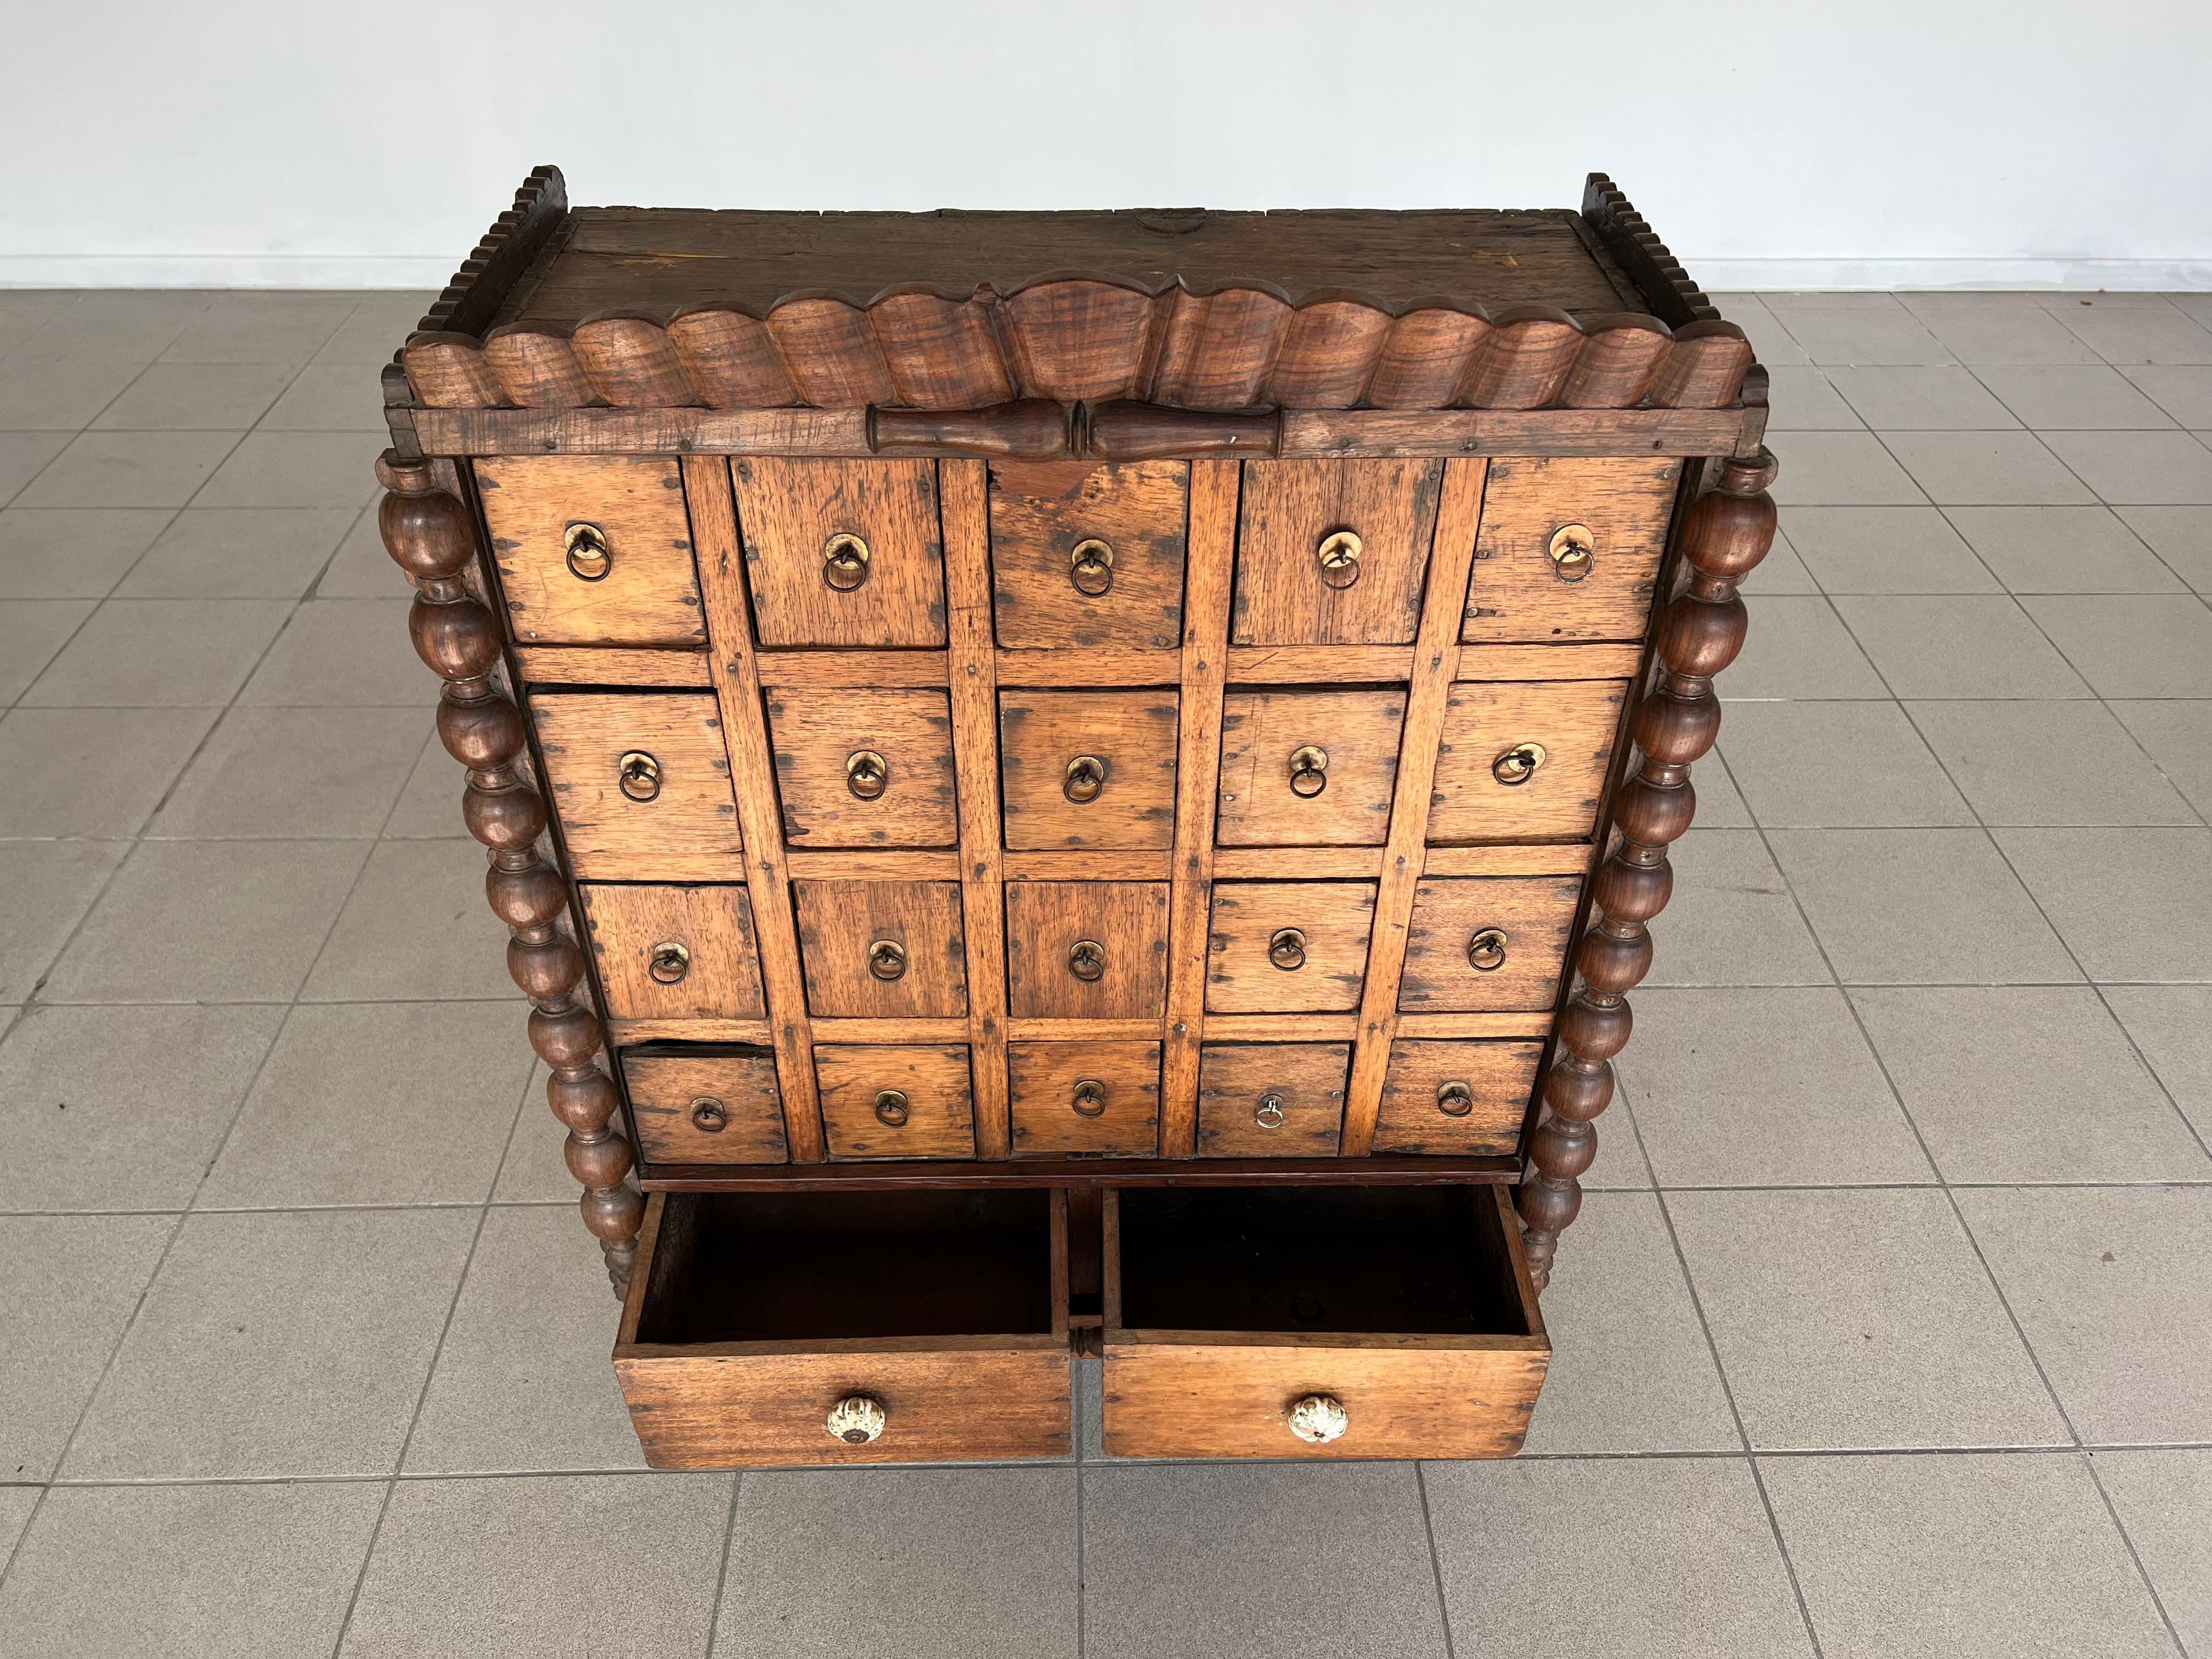 Asian Antique Rajastan Apothecary or Jewelry Chest of Drawers